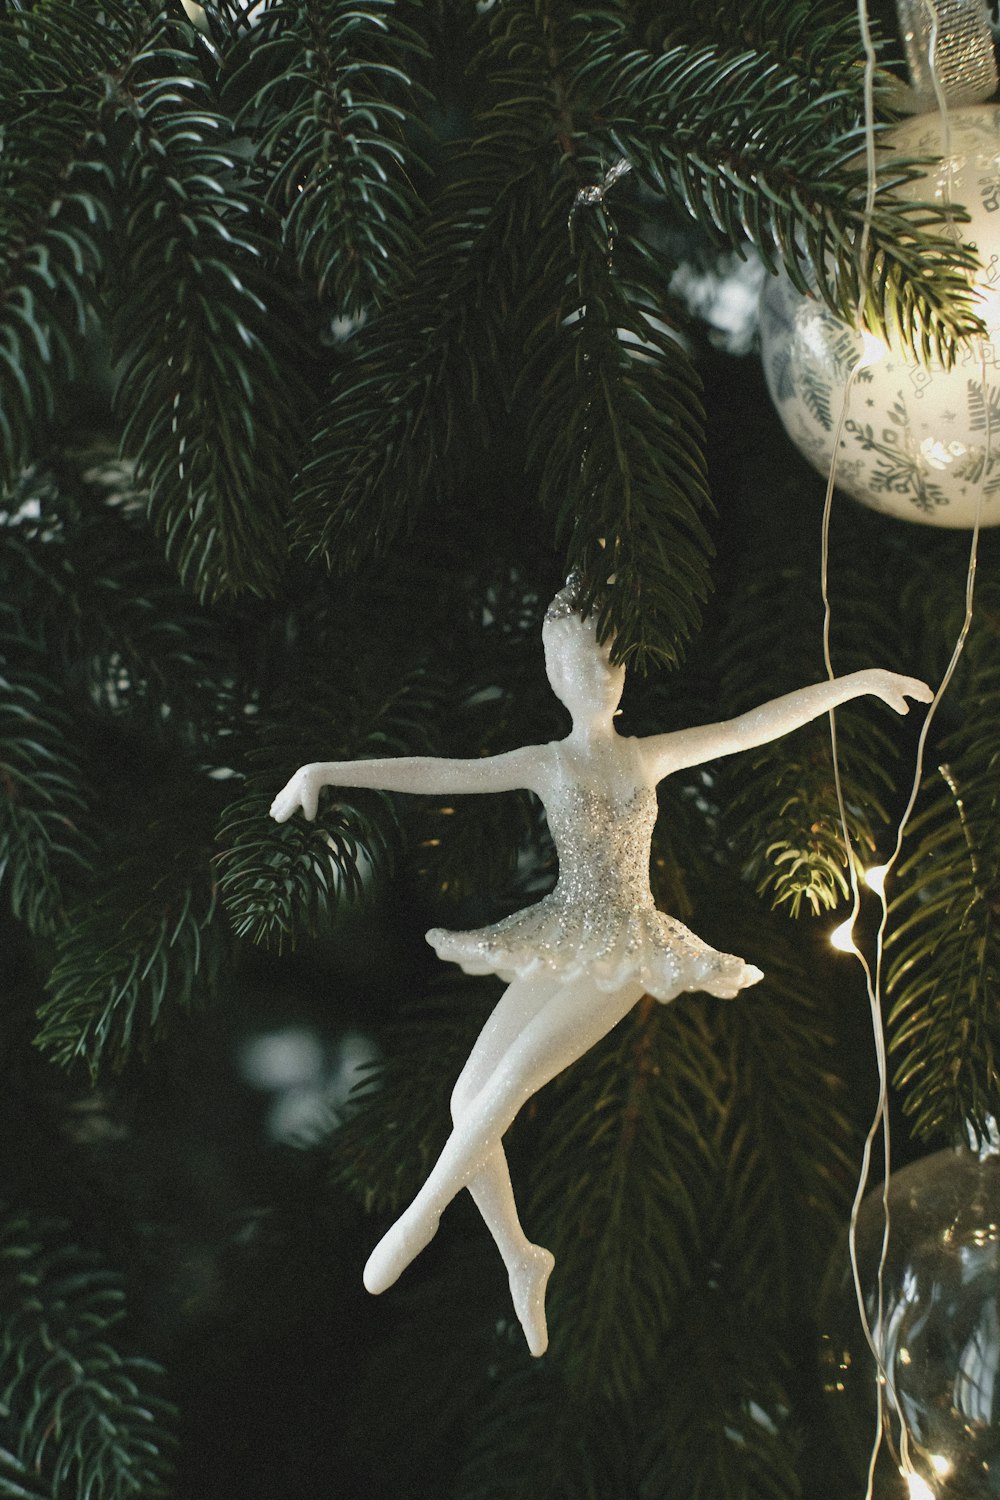 a white ornament hanging from a christmas tree